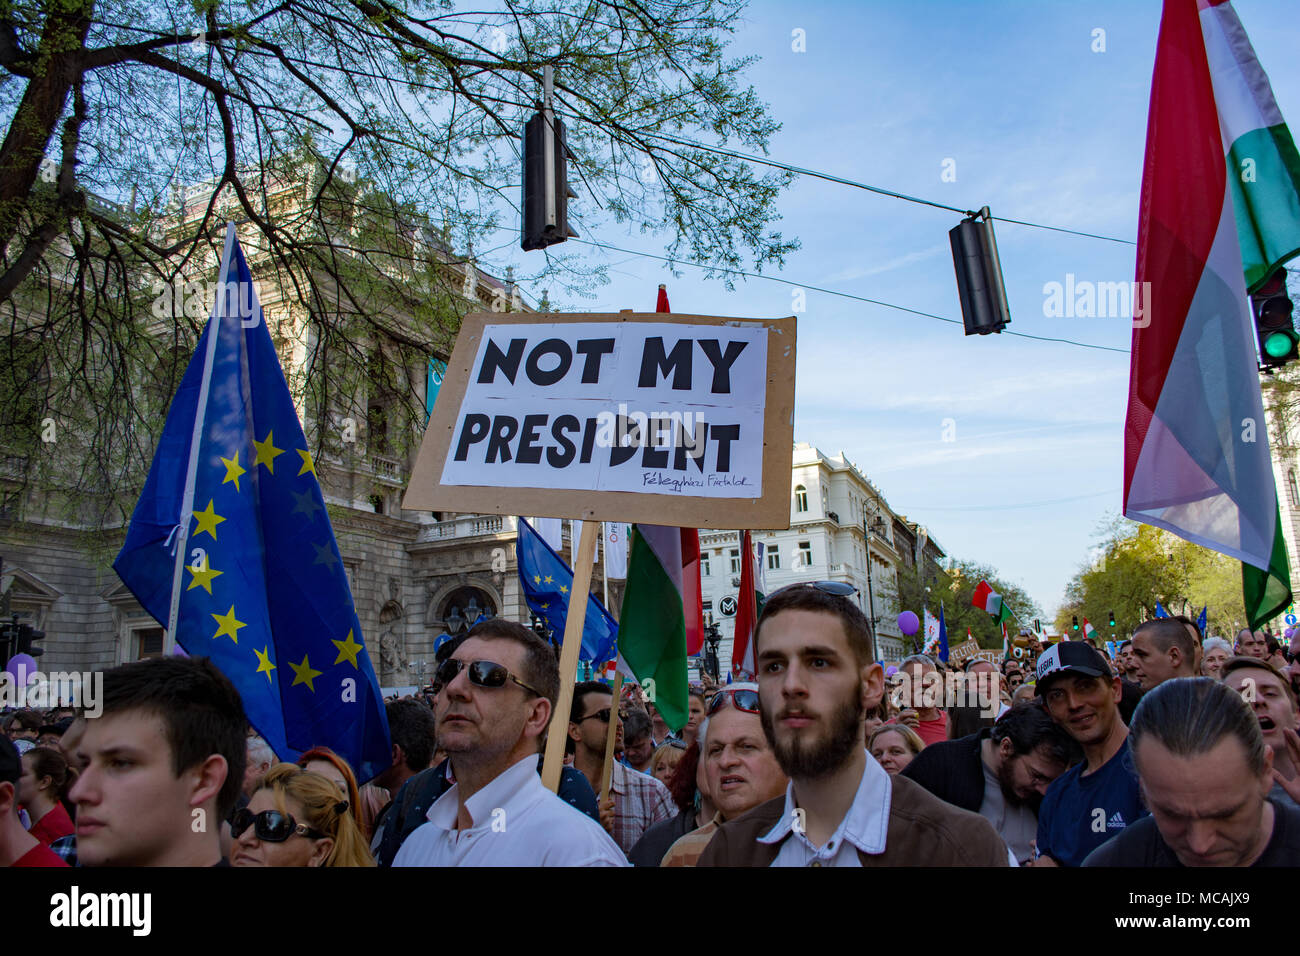 BUDAPEST, HUNGARY - APRIL 14, 2018: Political protest demonstration against the recently elected government for 'real democracy'. The rally was organi Stock Photo